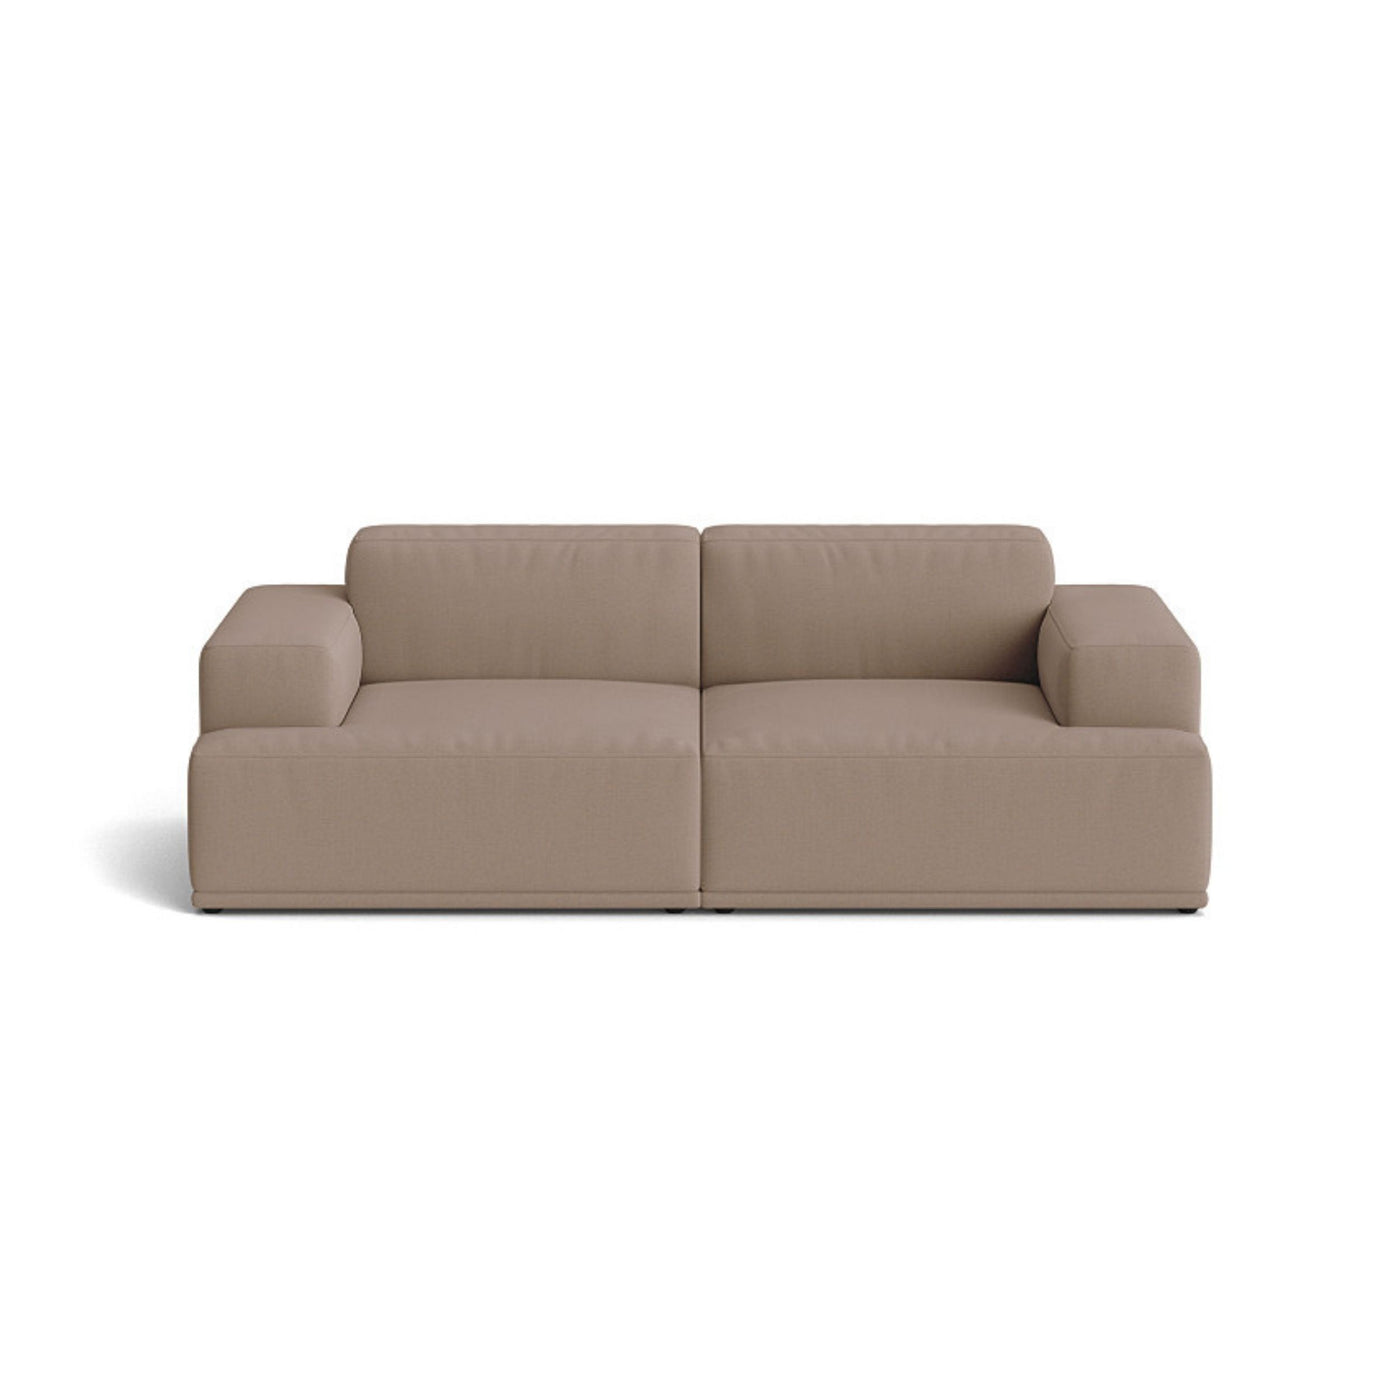 Muuto Connect Soft Modular 2 Seater Sofa, configuration 1. made-to-order from someday designs. #colour_steelcut-trio-426